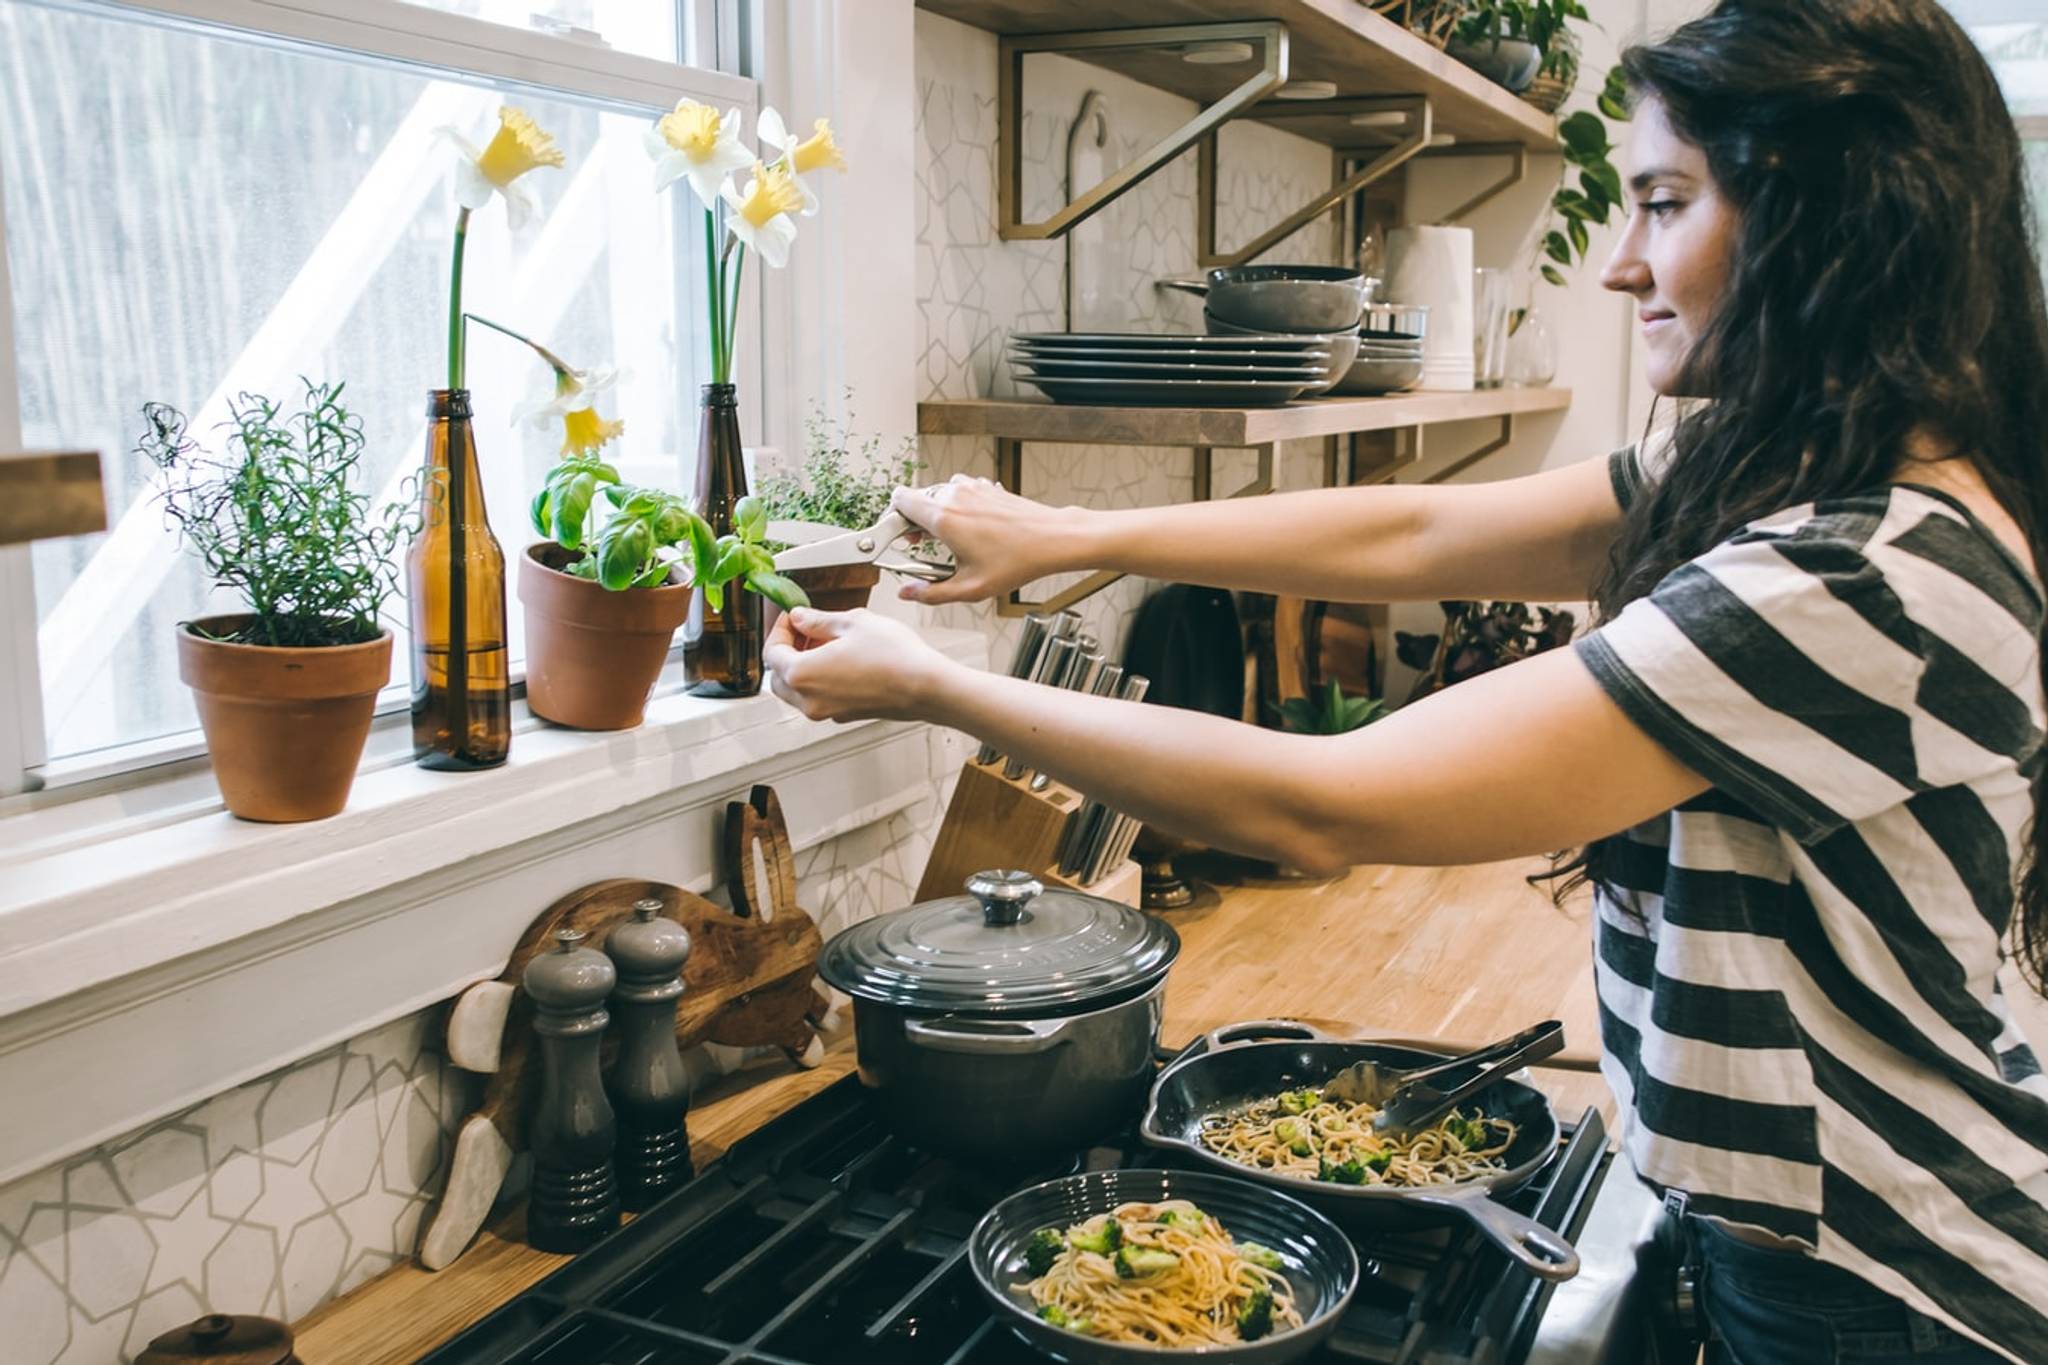 Americans find joy in new cooking discoveries